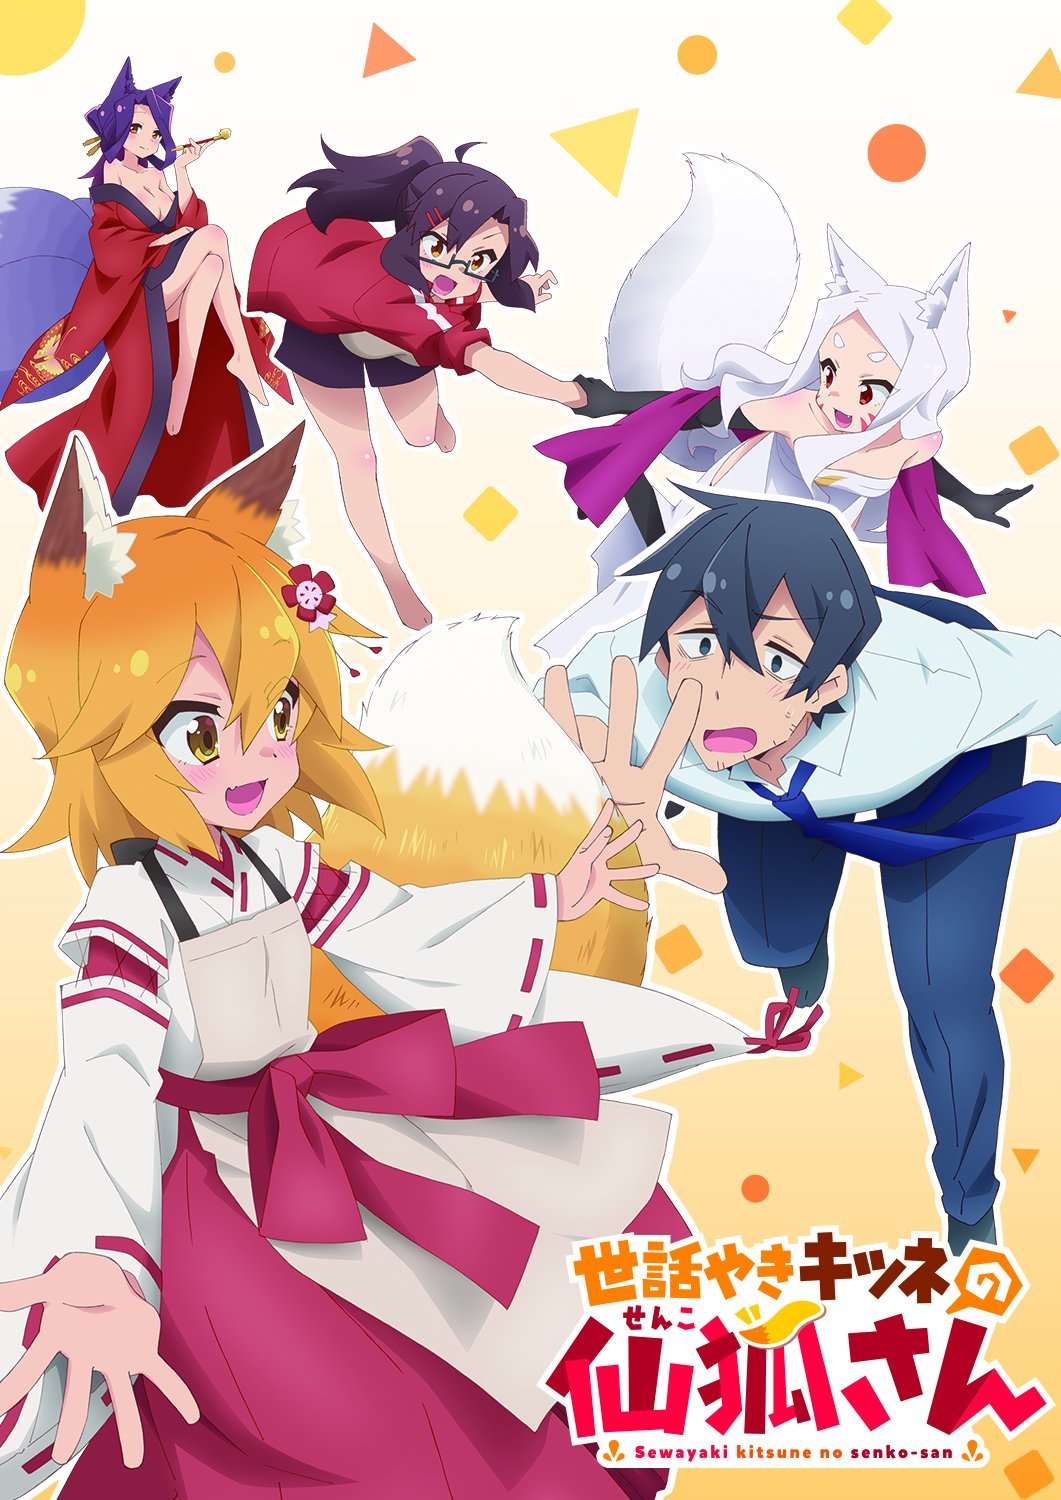 A new PV and key visual for the âSewayaki Kitsune no Senko-sanâ anime has been published. Series premiere April 10th. -Synopsis-ââThe everyday life of Nakano, a salaryman working for an exploitative company, is suddenly intruded upon by the fox,...